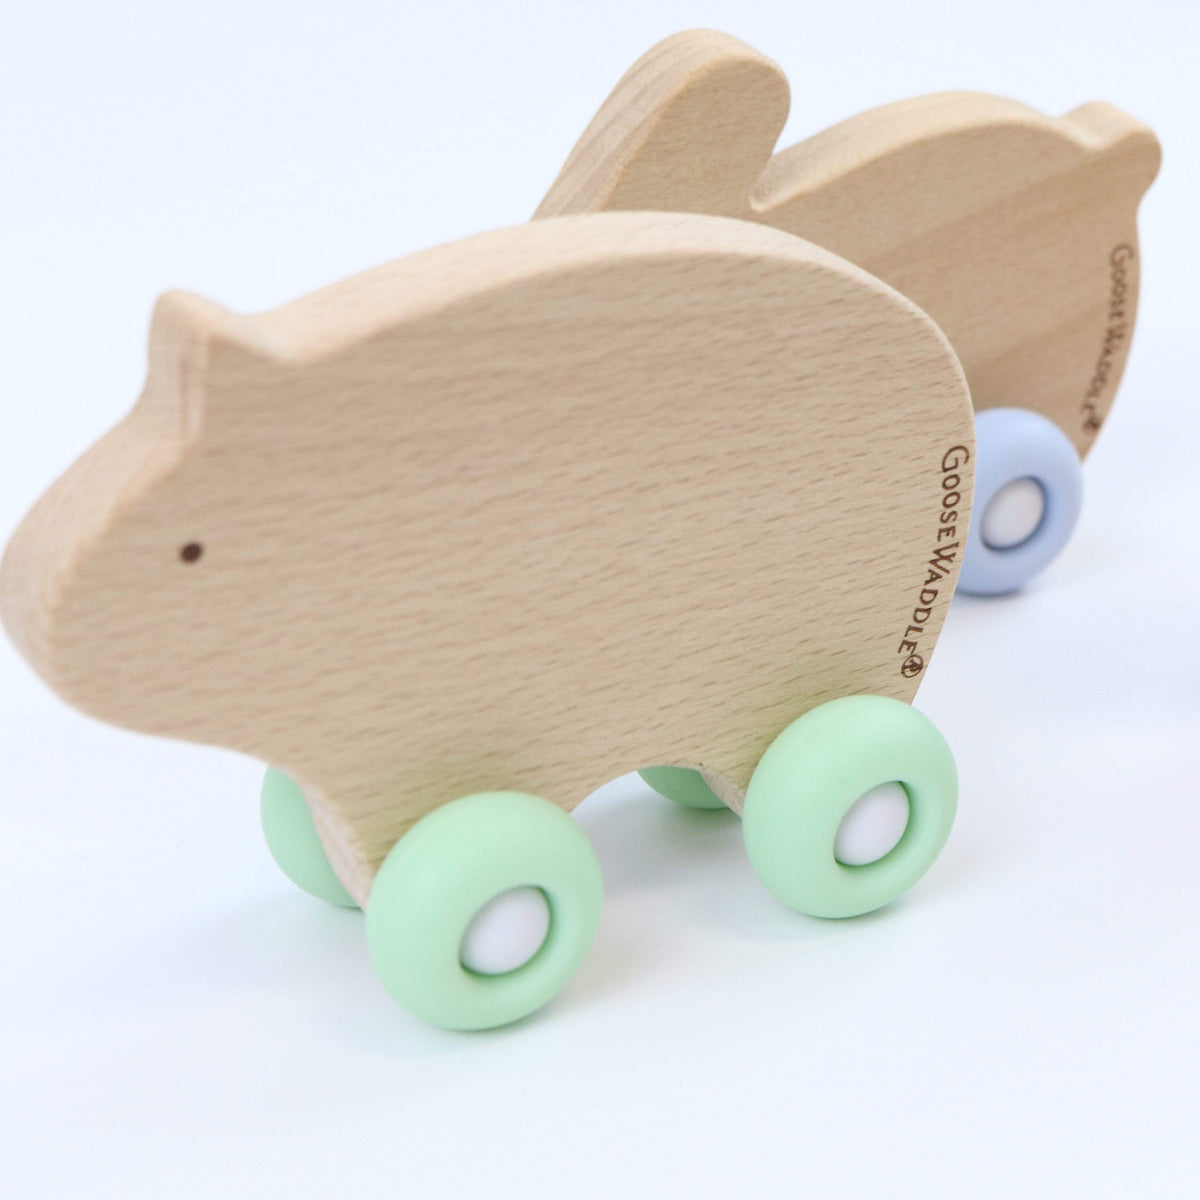 GooseWaddle Teether Silcone + Wood Teether with Wheels (bear, mint)